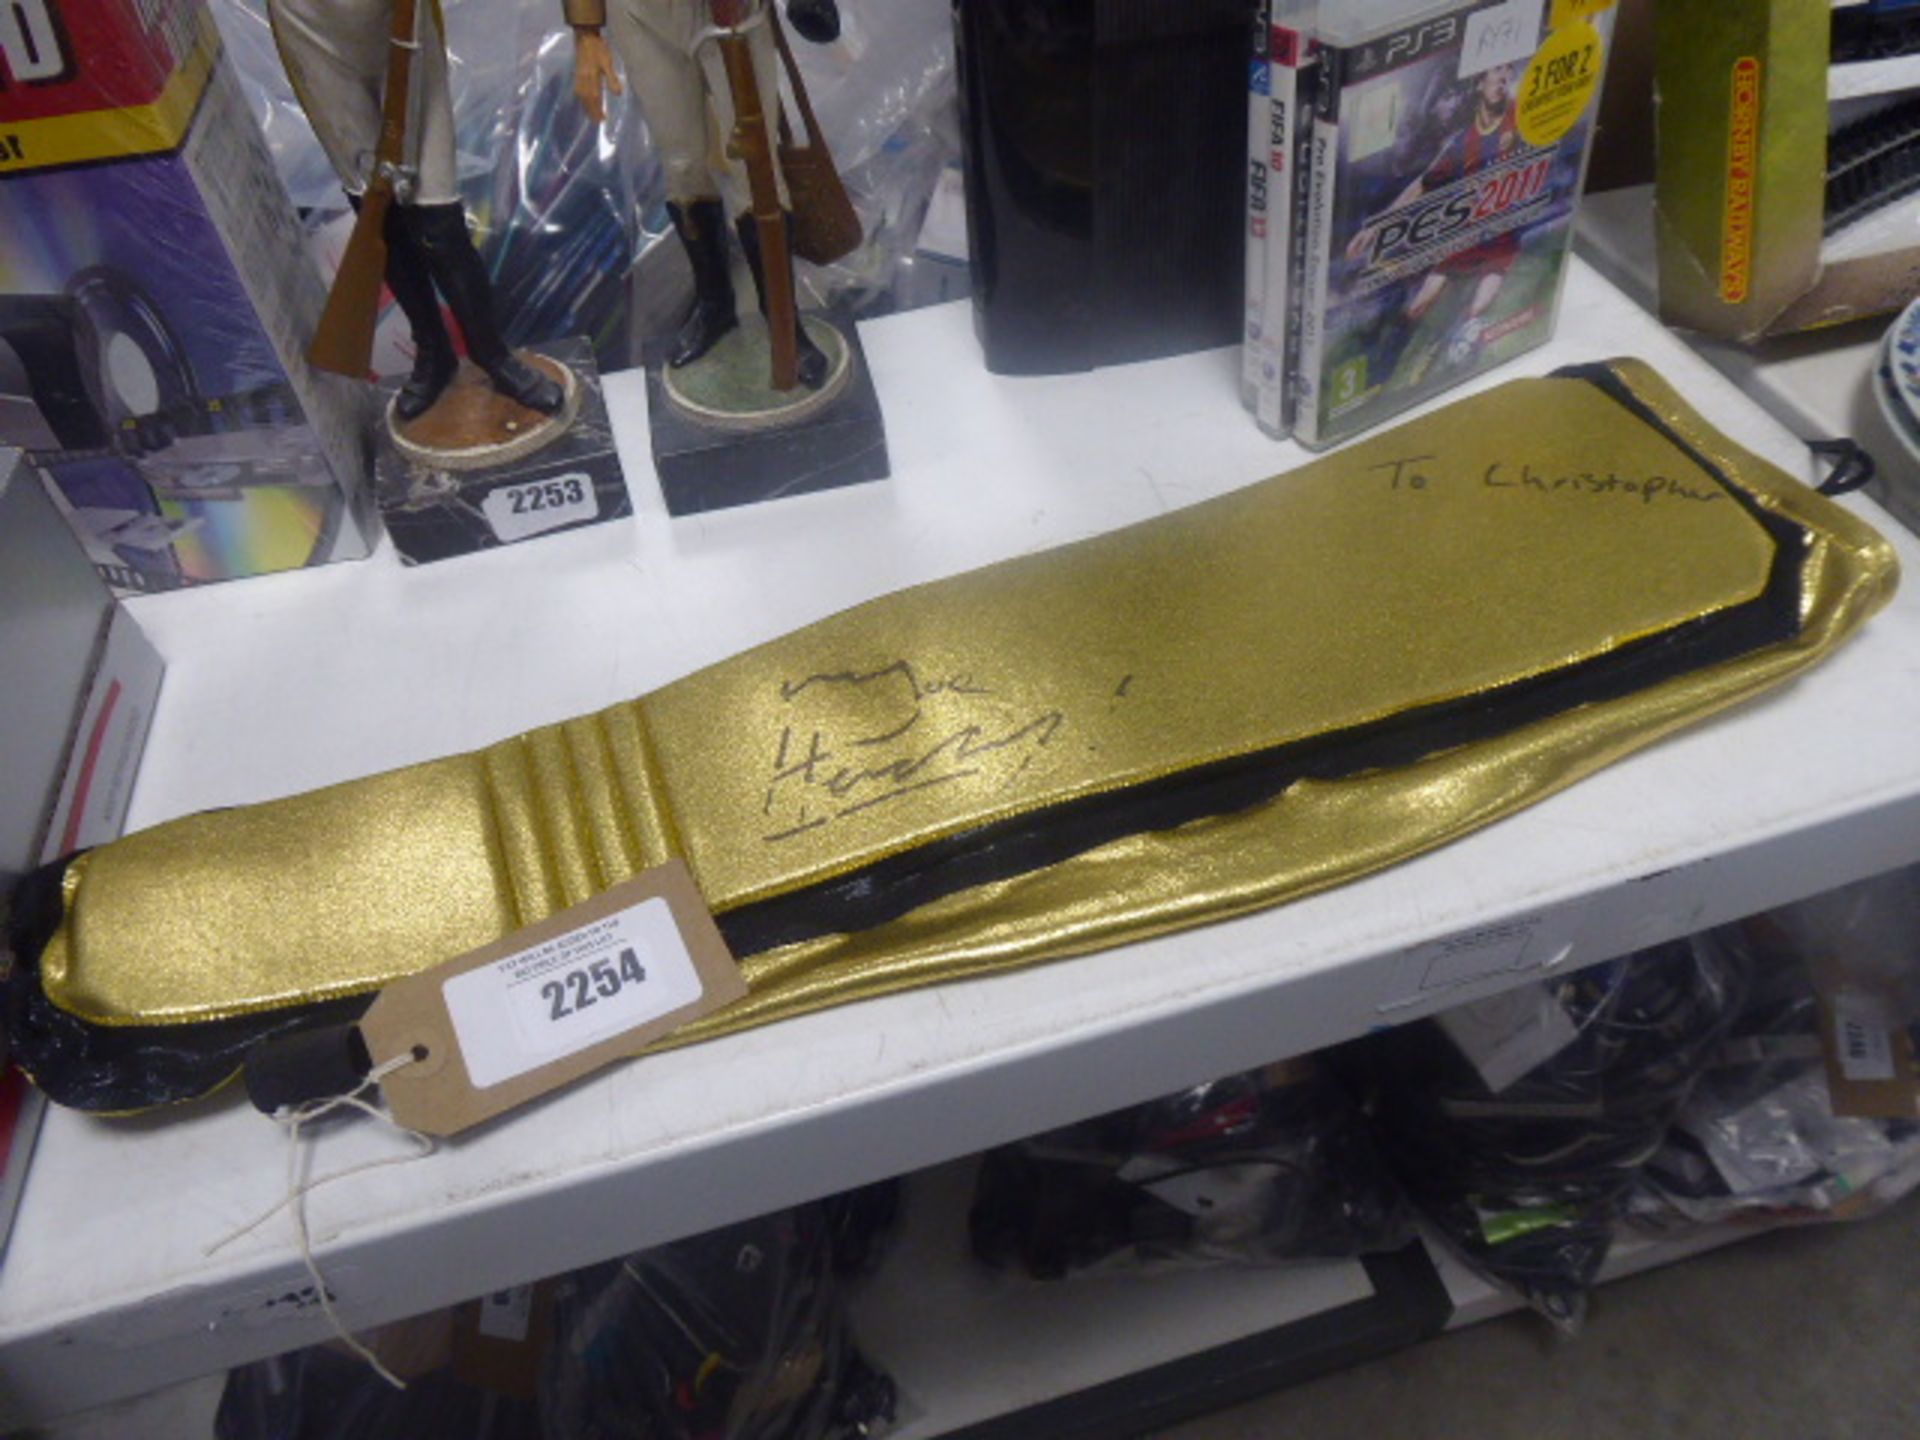 2321 (17/06) - Gold and black signed leg guard personalised to 'Christopher' (No authenticity,